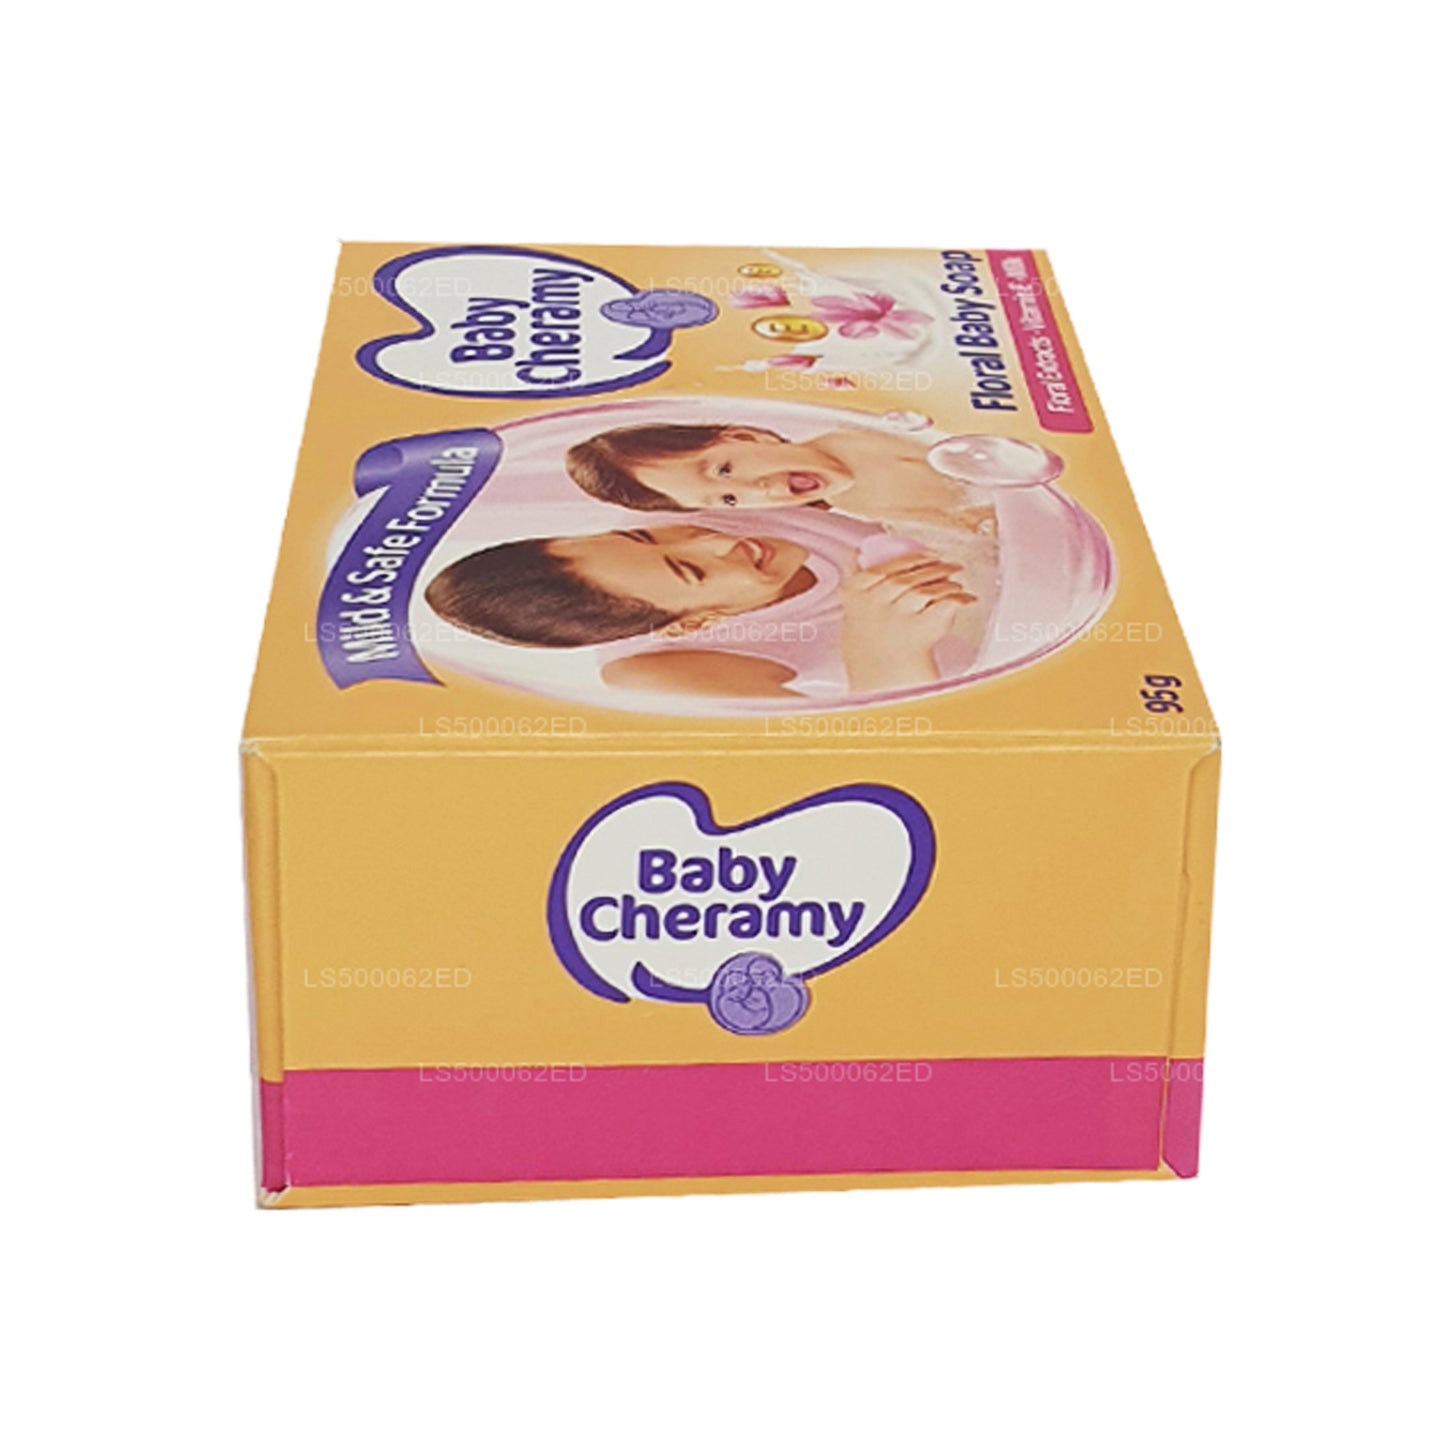 Baby Cheramy Floral Baby Soap (95g)